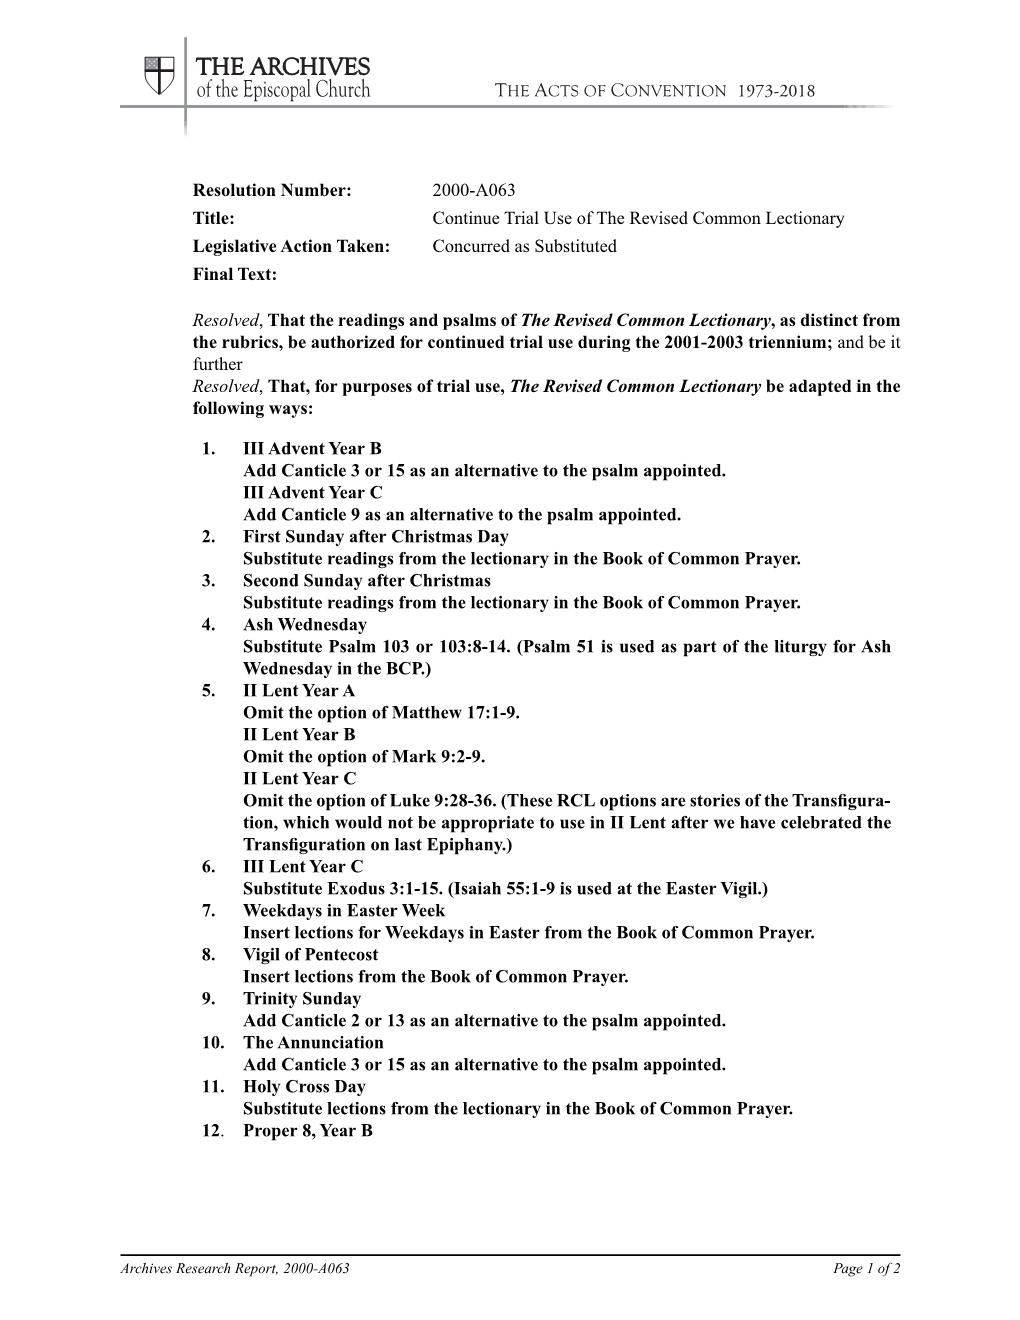 2000-A063 Title: Continue Trial Use of the Revised Common Lectionary Legislative Action Taken: Concurred As Substituted Final Text